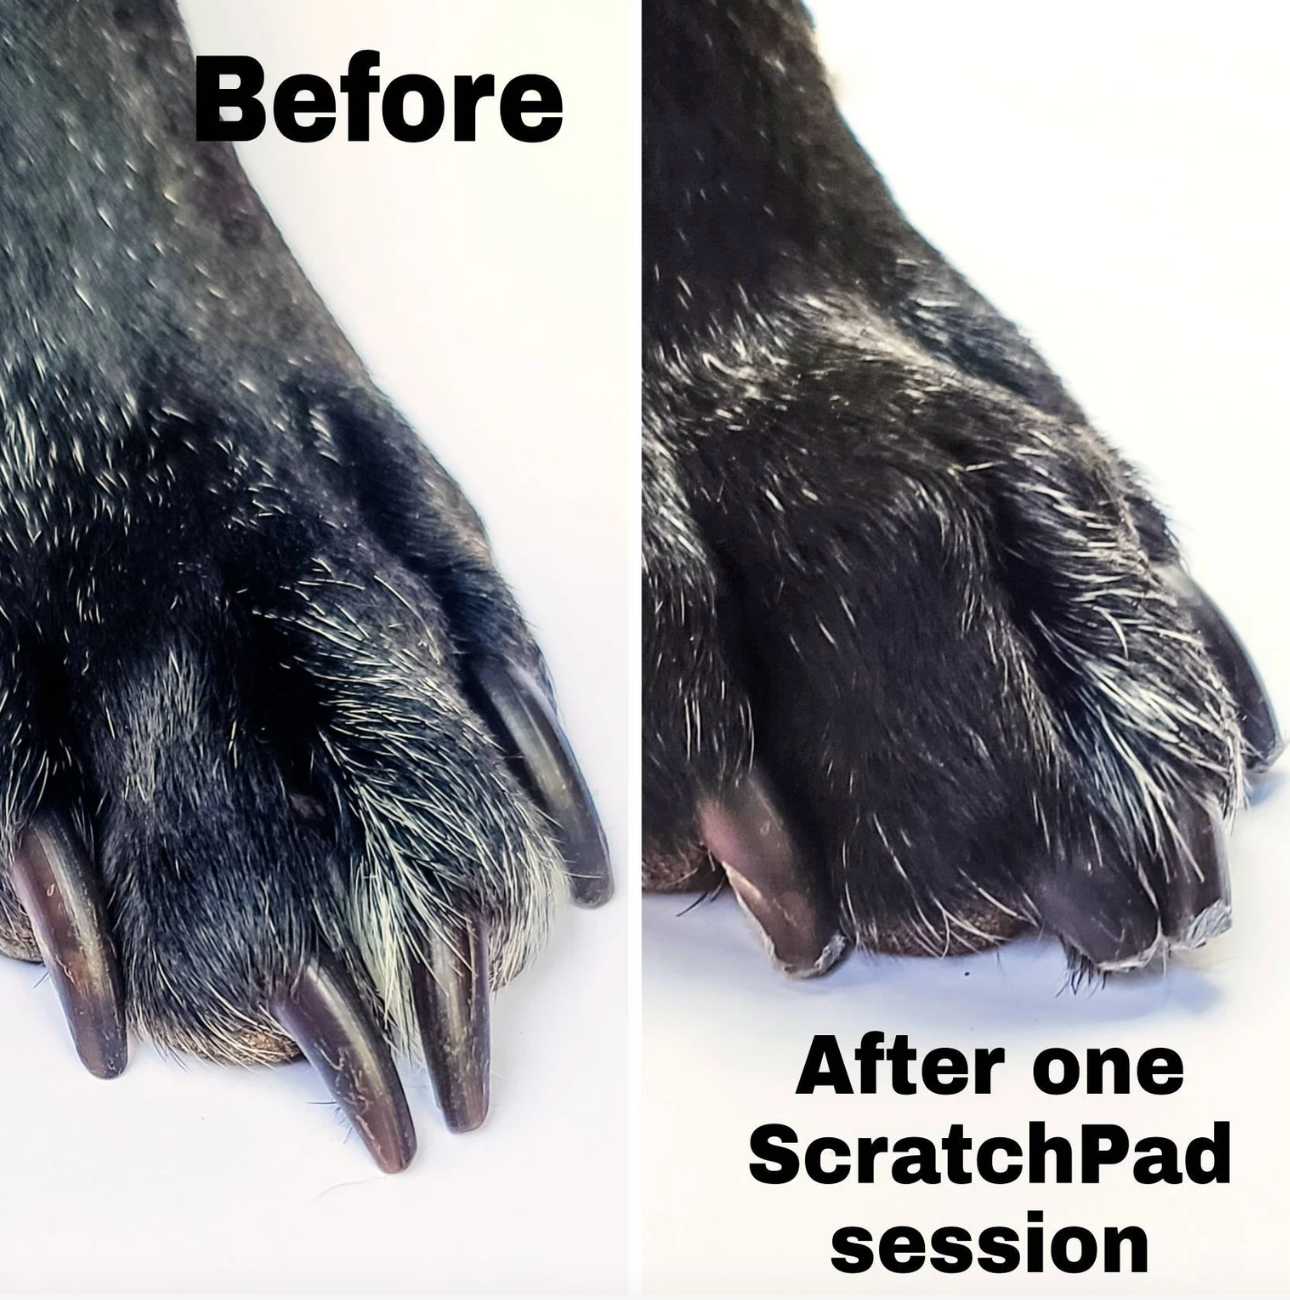 a before and after photo showing a dog's nails shorter after using the scratchpad